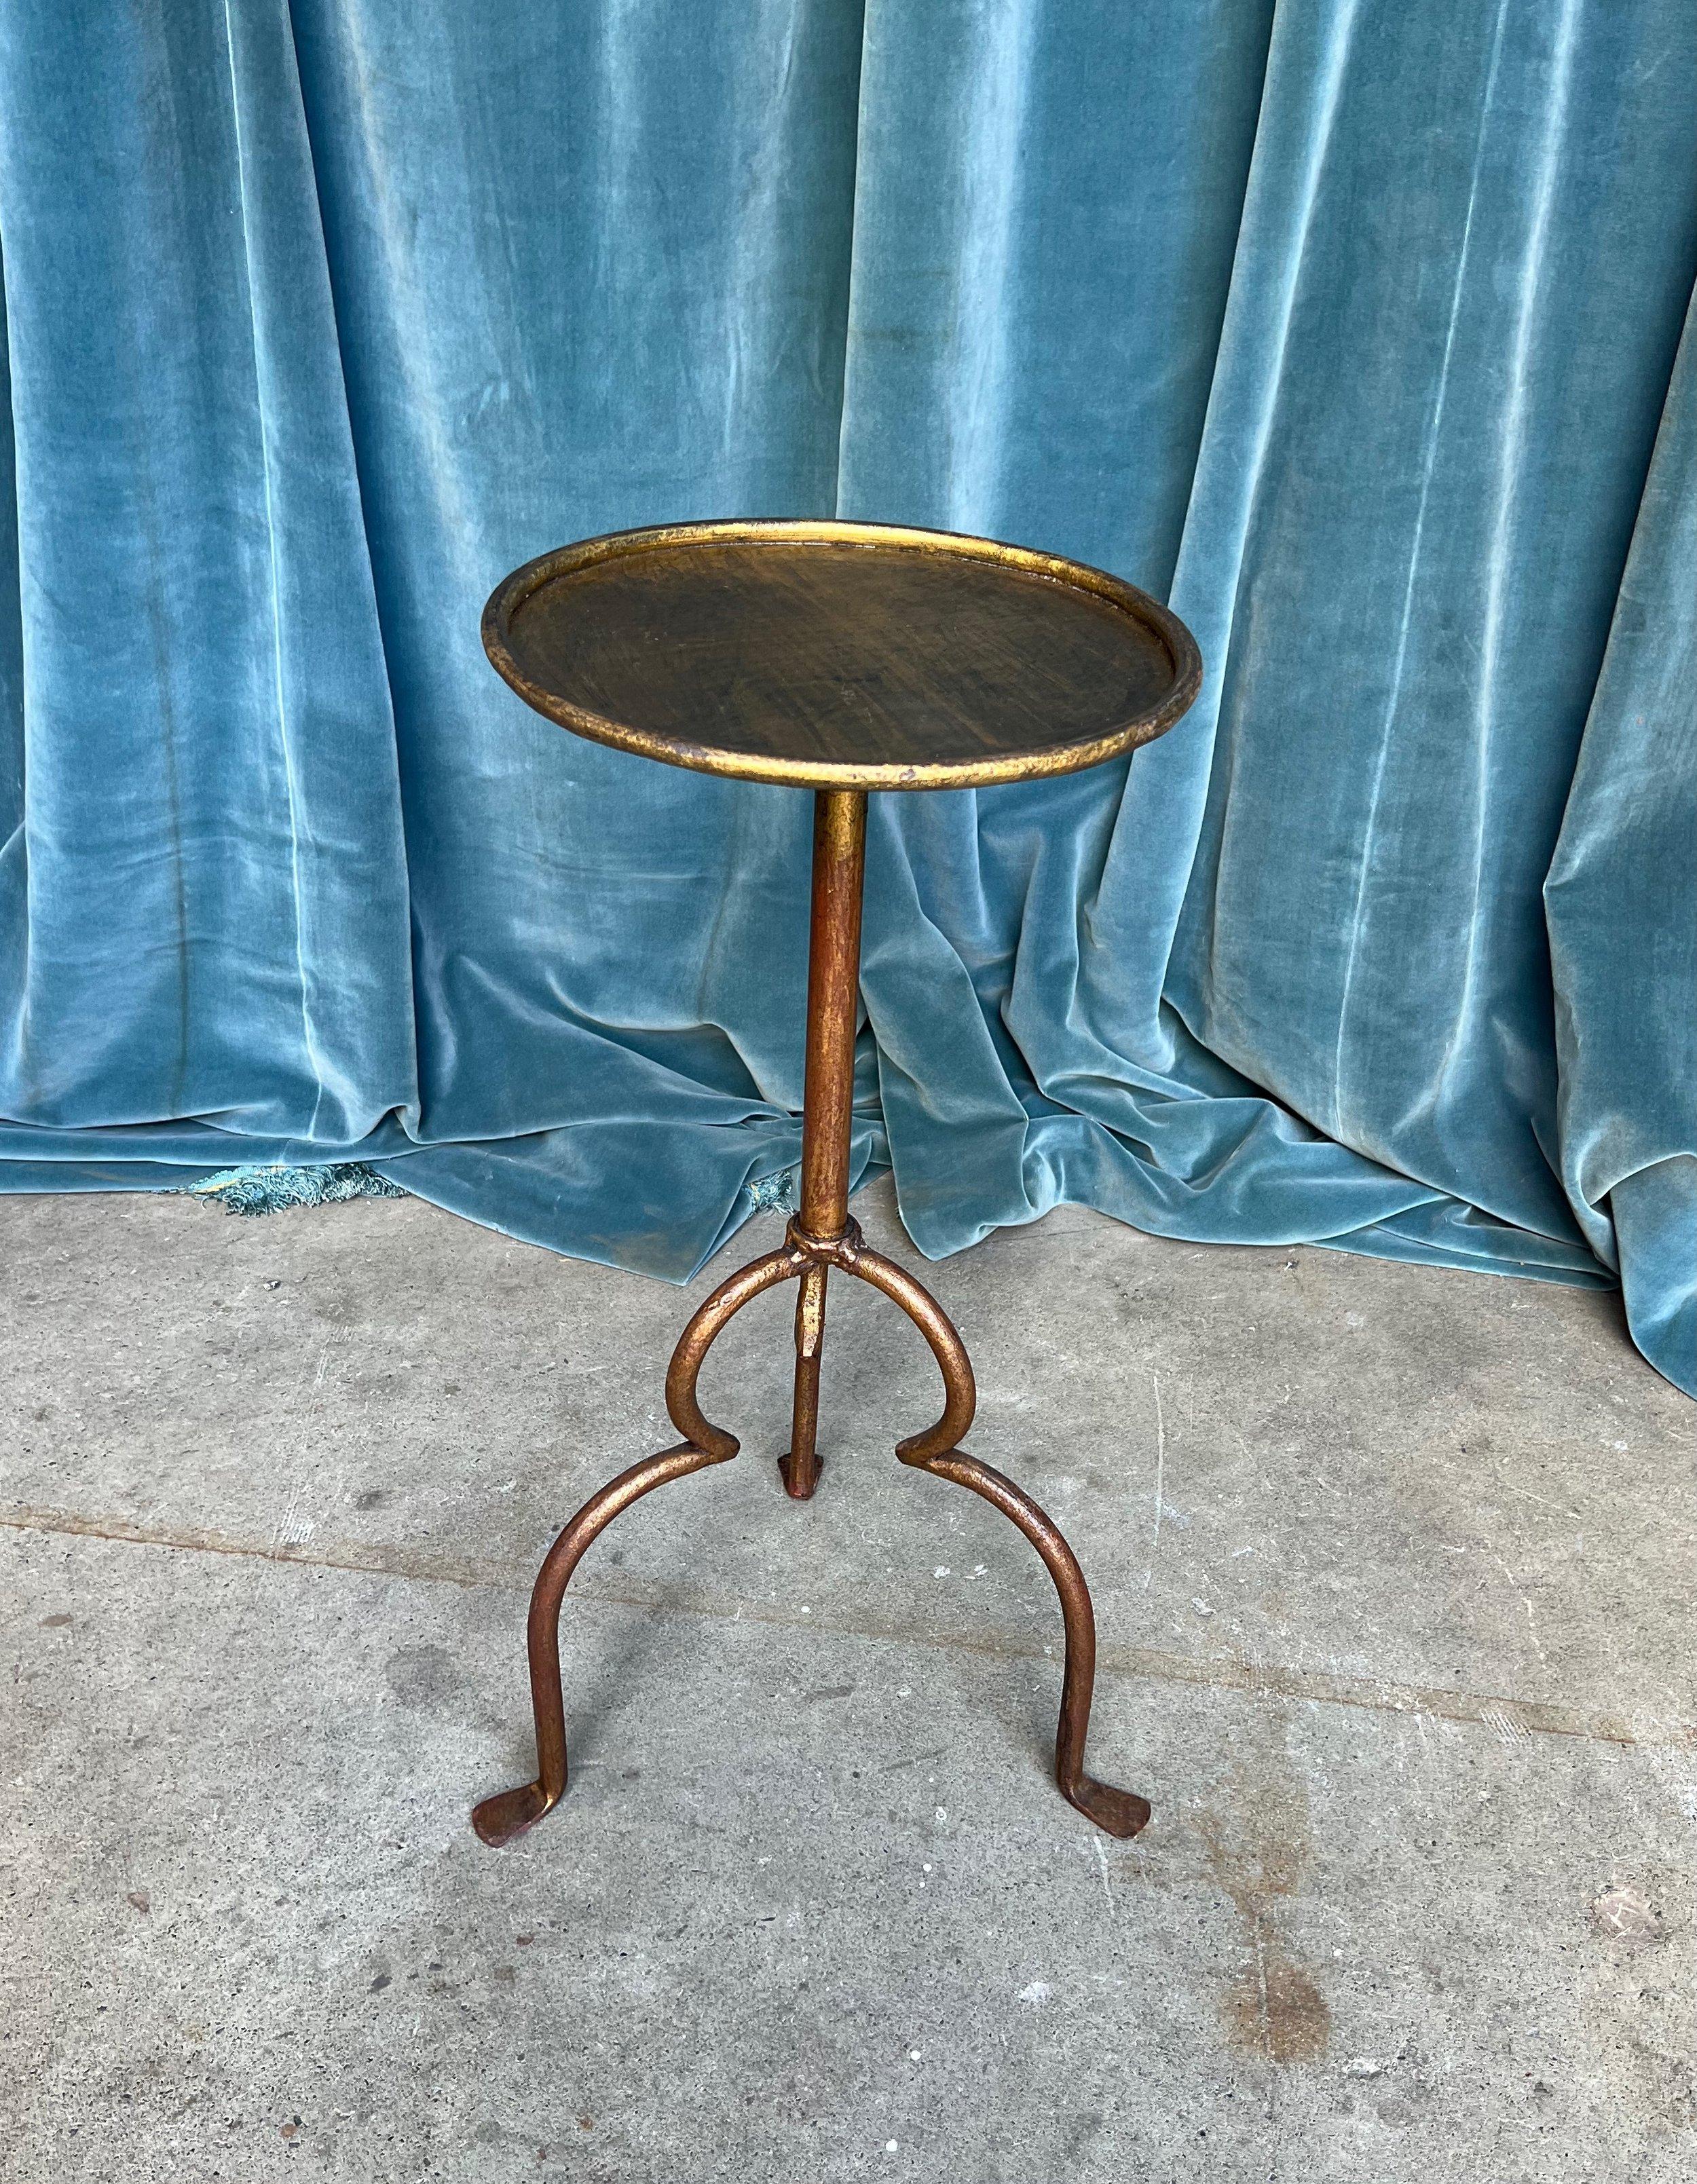 Spanish Gilt Metal Side Table with a Fancy Tripod Base